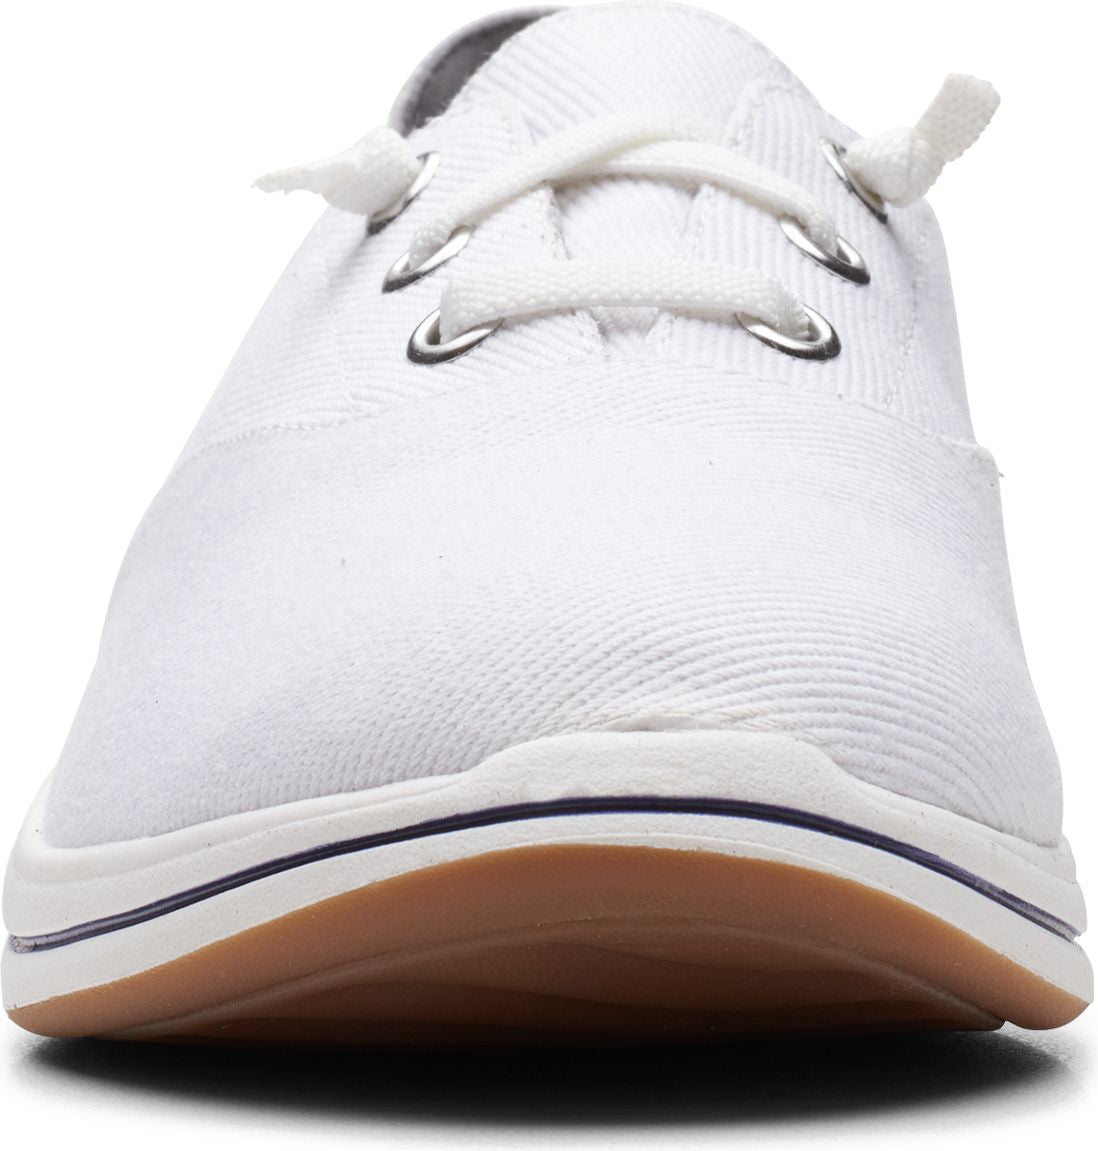 Clarks Shoes Breeze Ave White